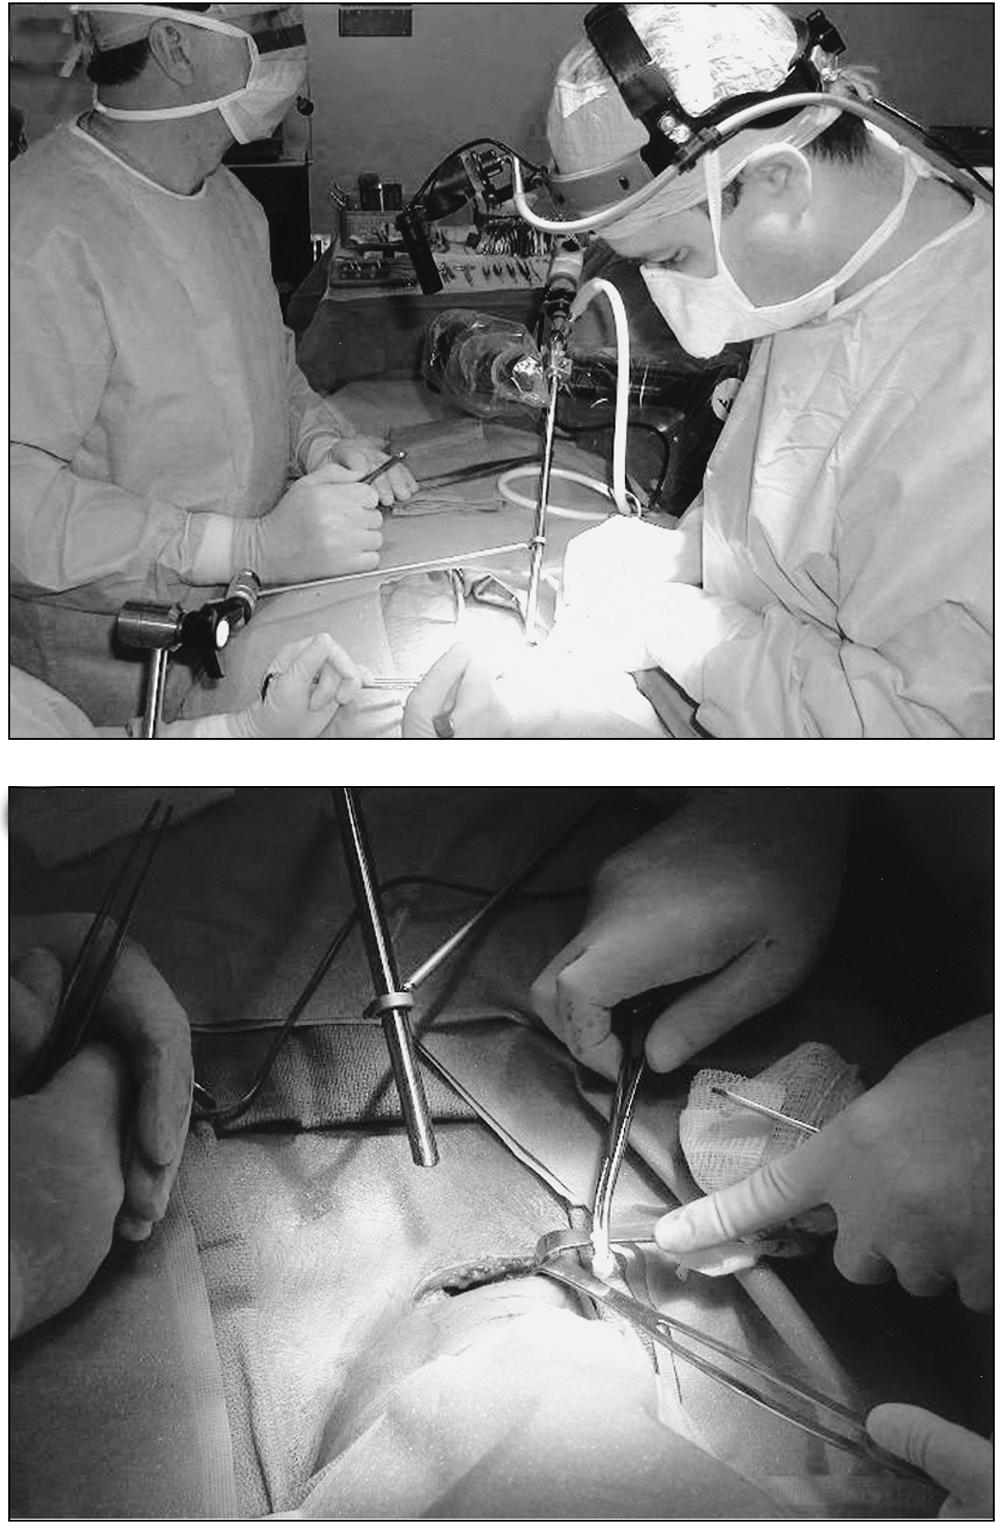 A 45-degree laparoscope was positioned in a lowprofile angle facing the operative field.